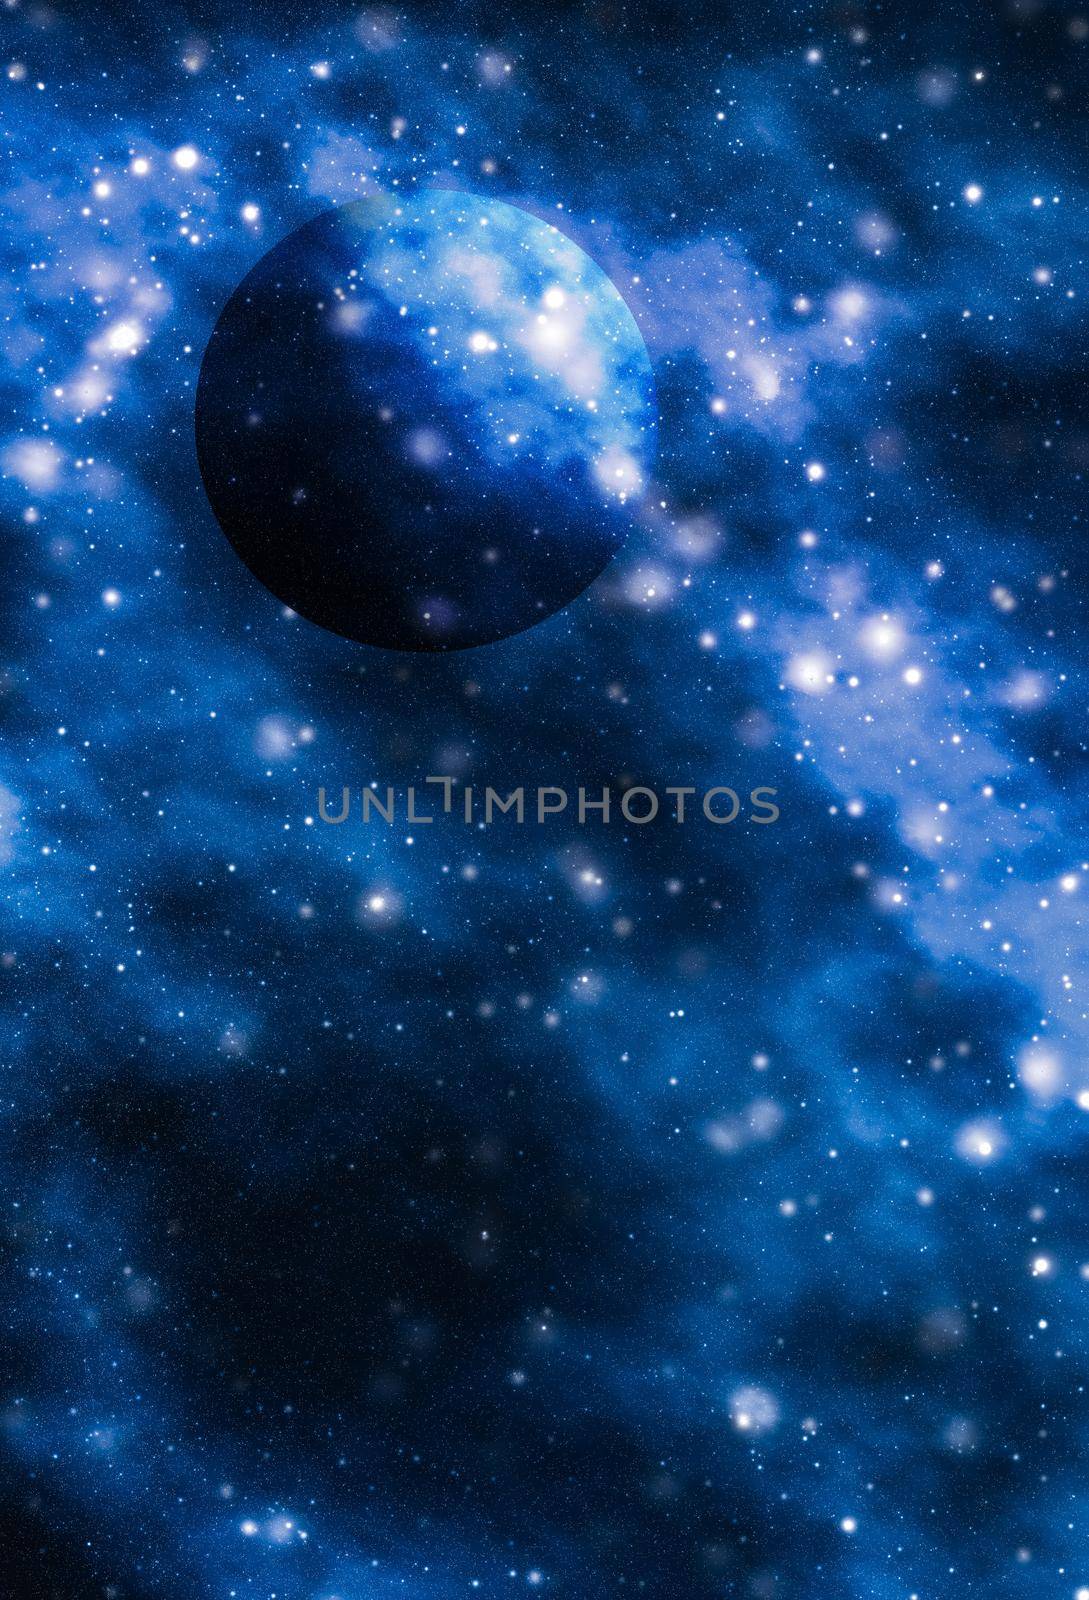 Stars, planet and galaxy in cosmos universe, space and time travel science background by Anneleven